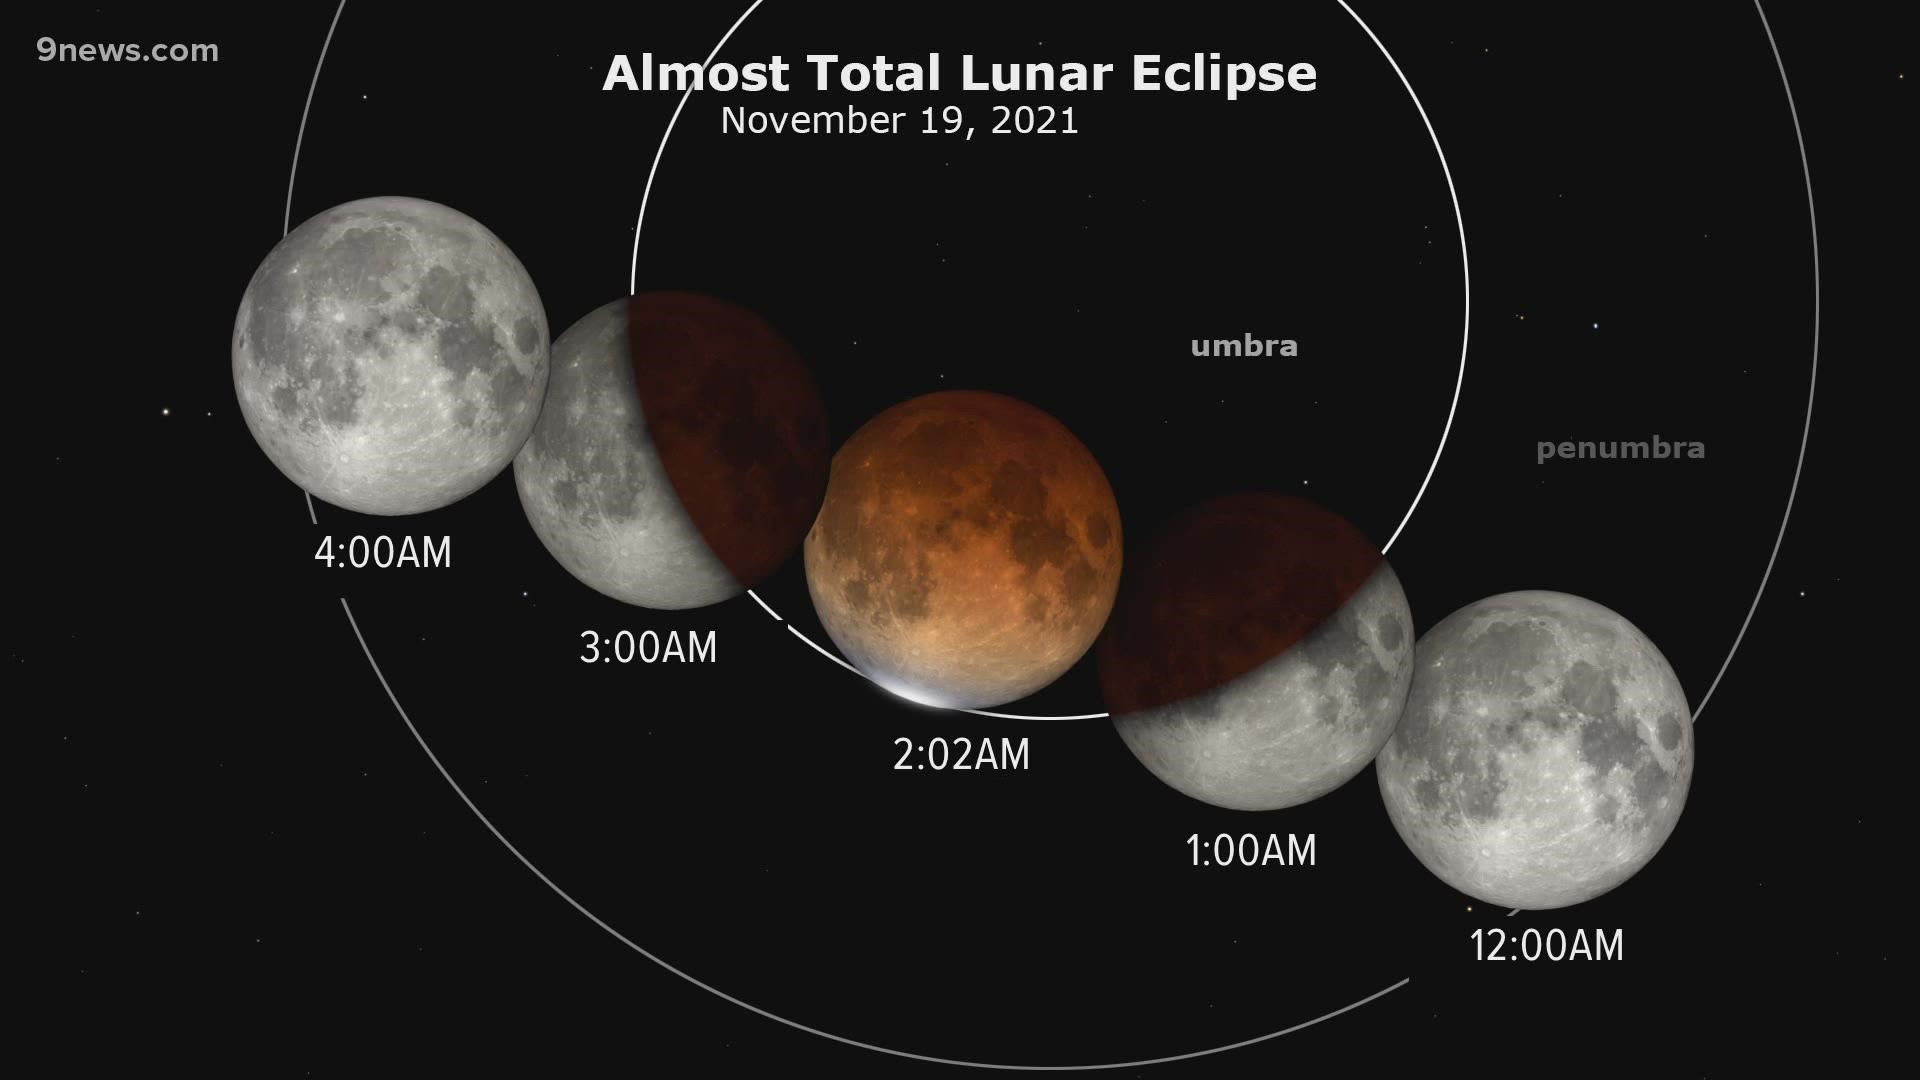 Here's when to watch the longest partial lunar eclipse in your lifetime.